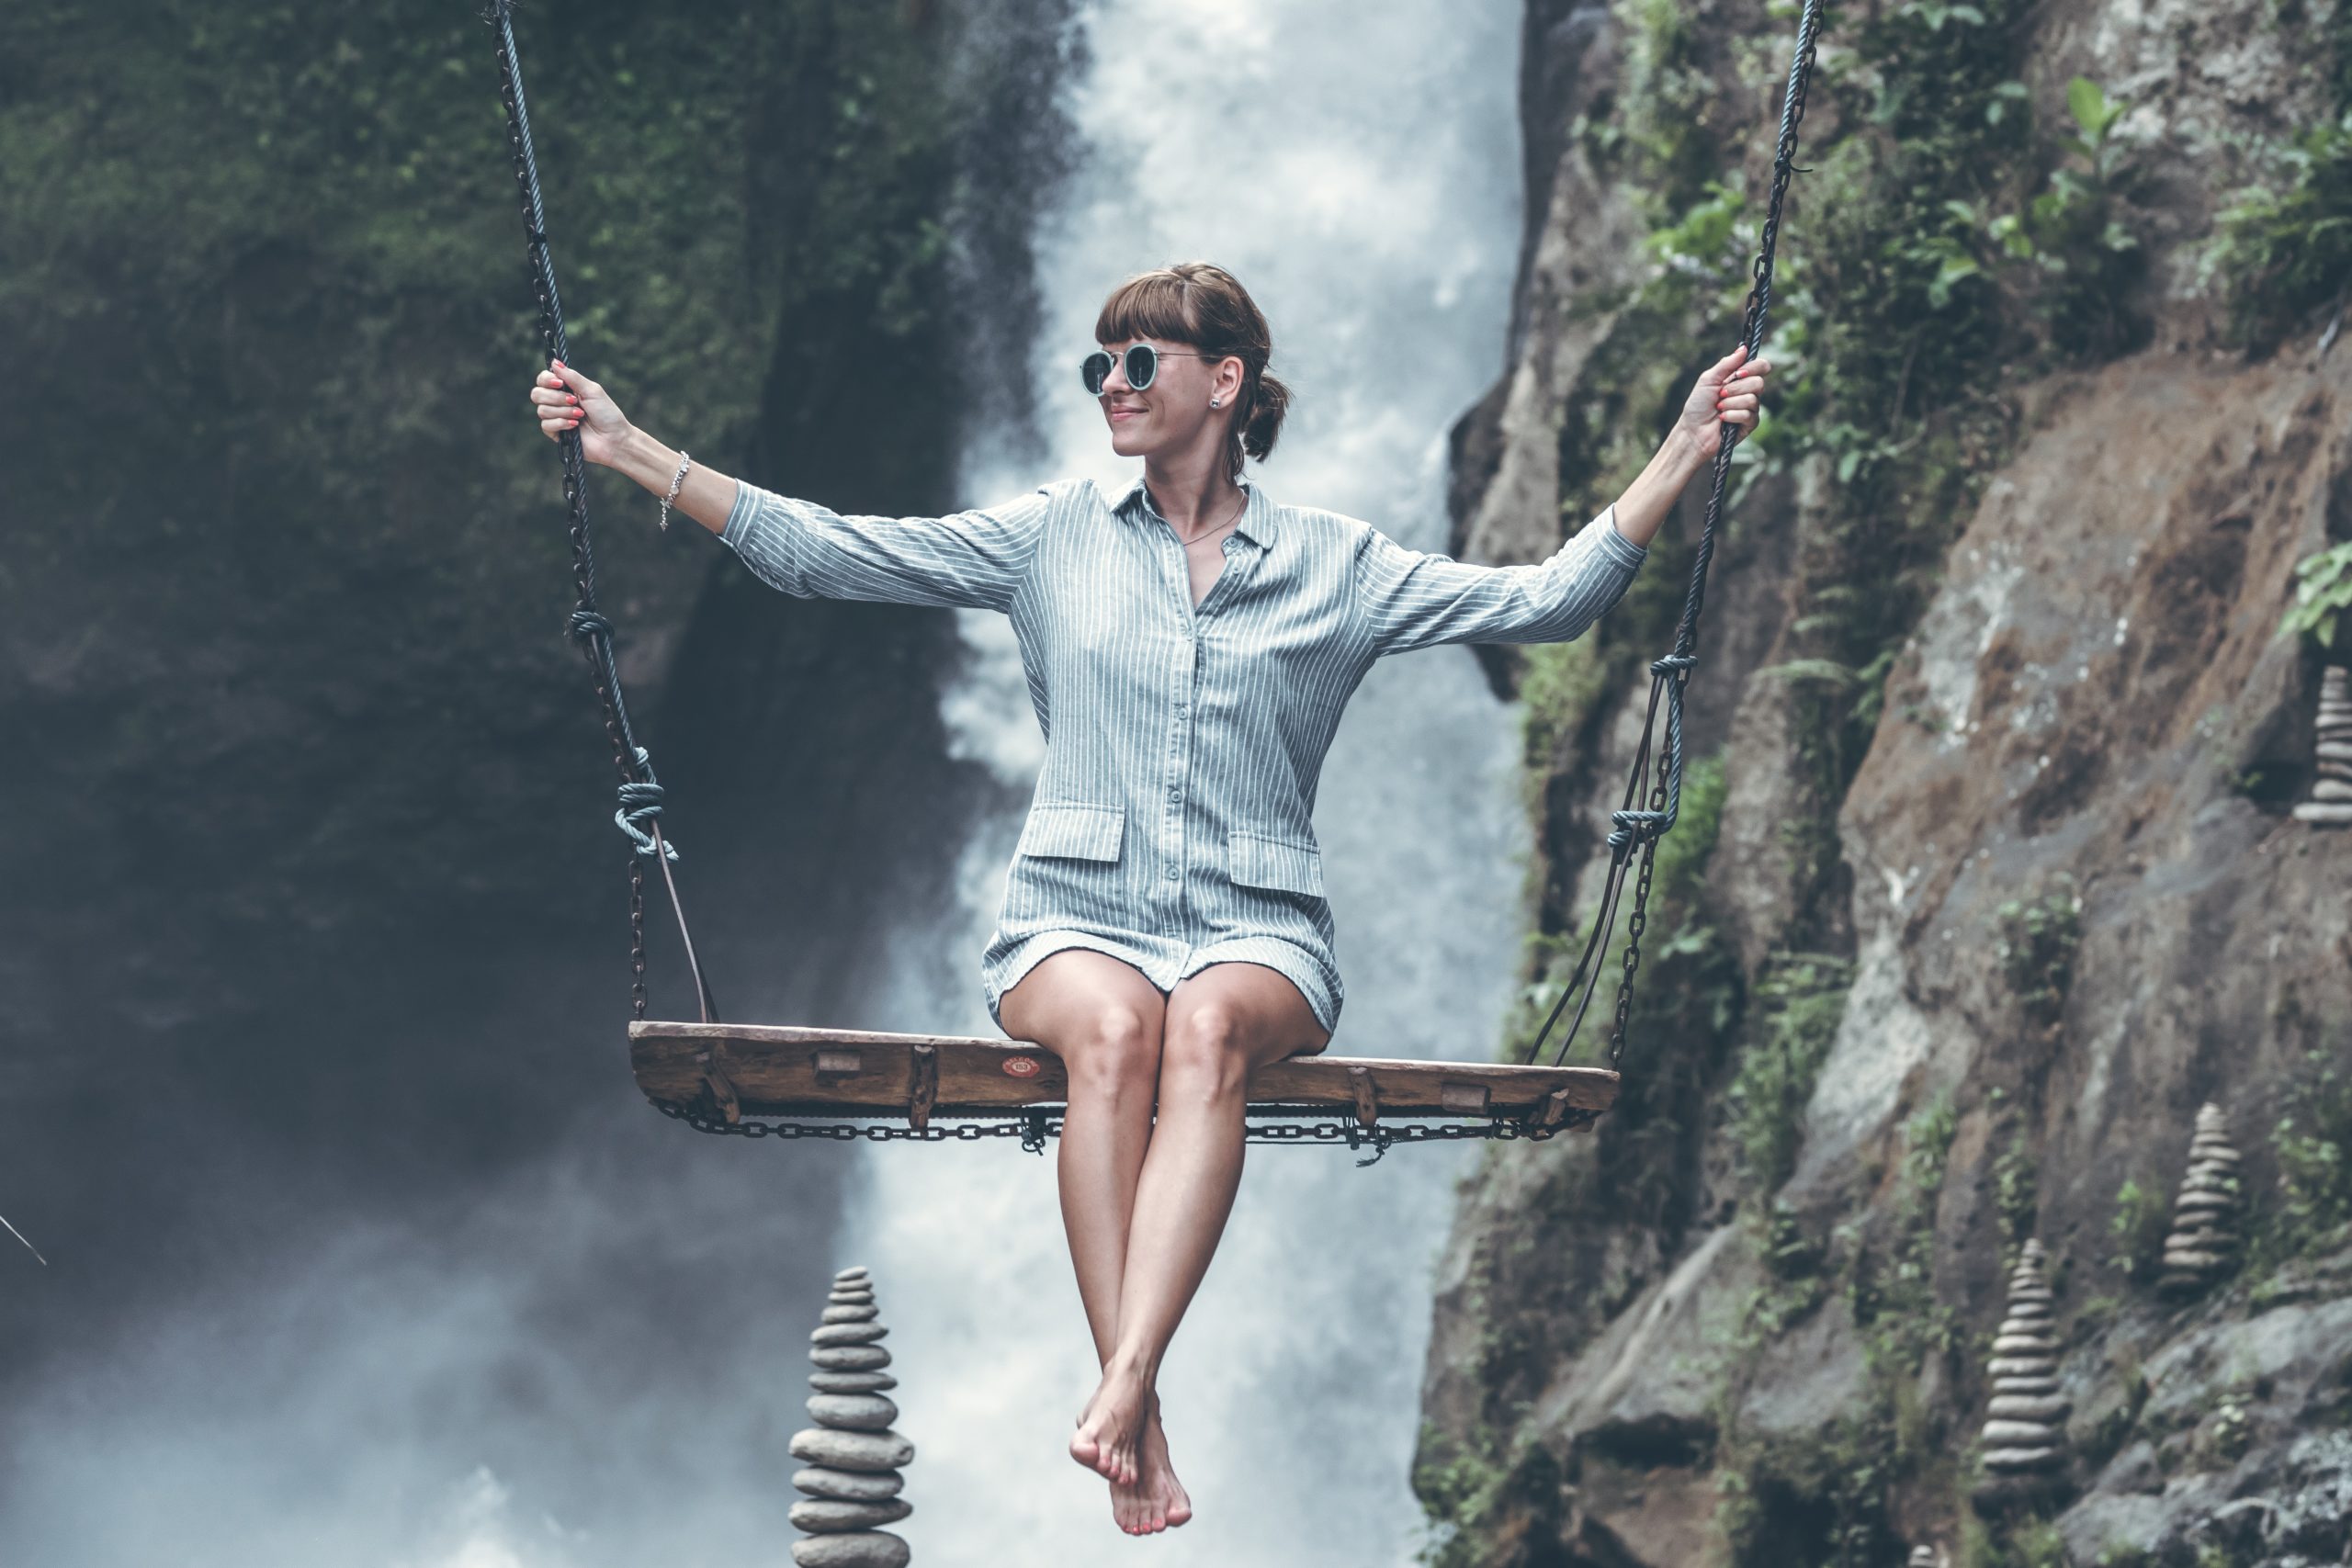 photo-of-woman-riding-swing-in-front-of-waterfalls